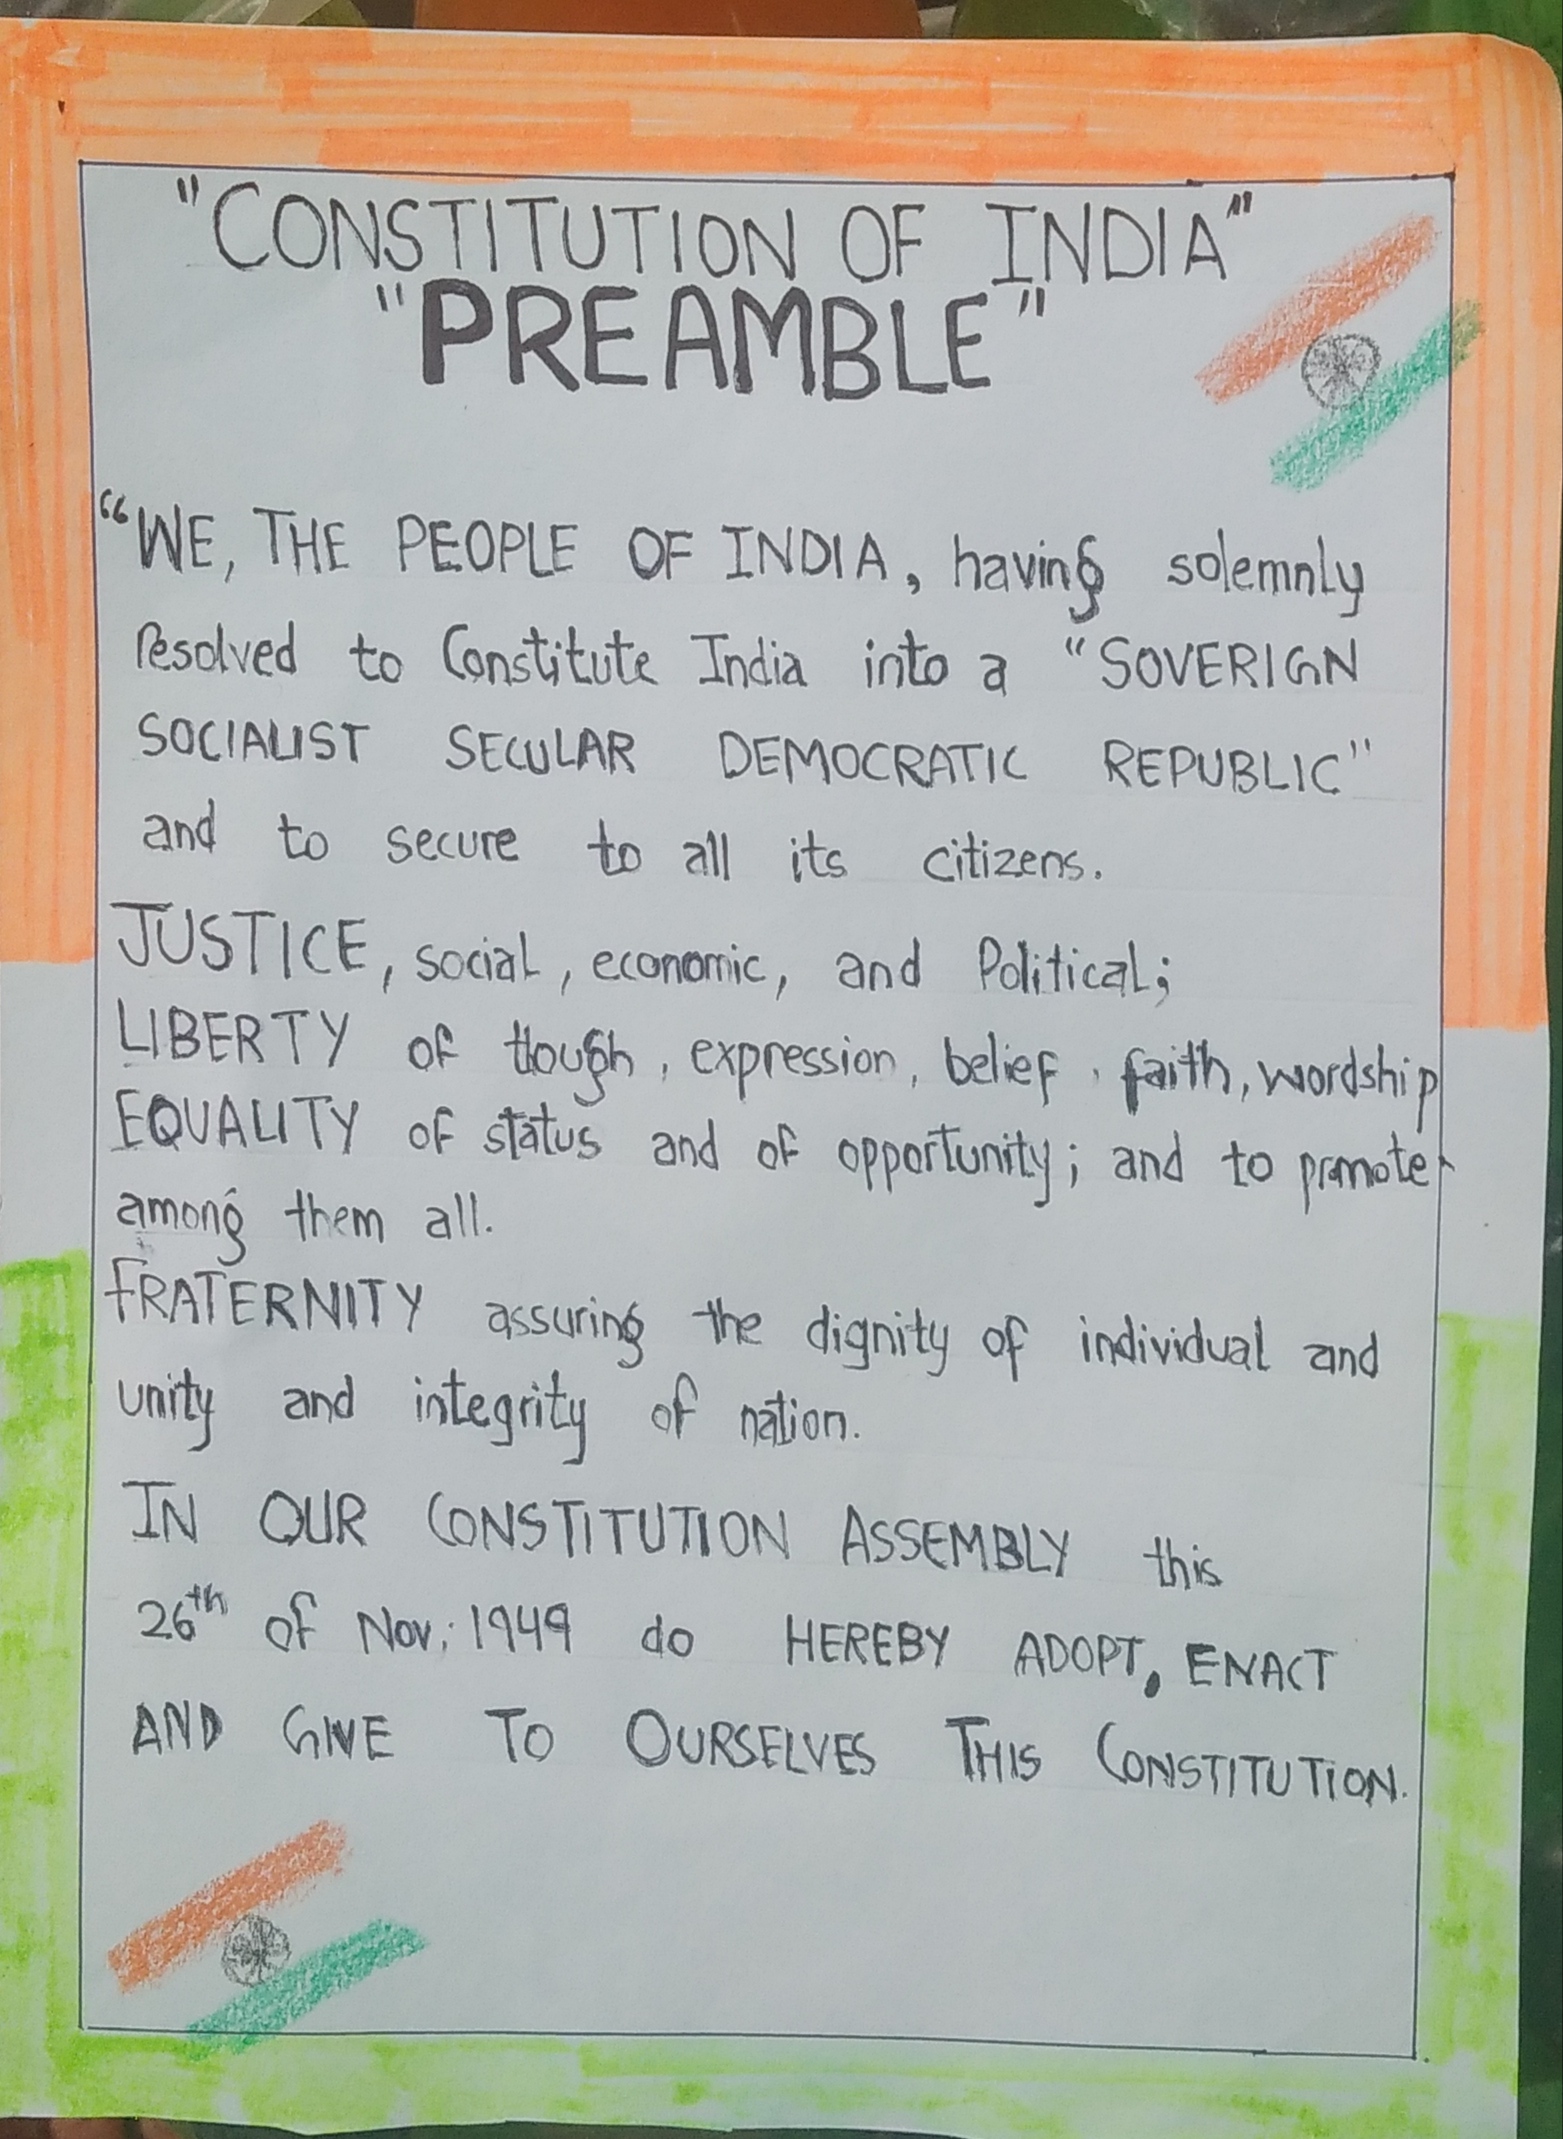 What Is The Preamble To The Constitution Of India Regarded As